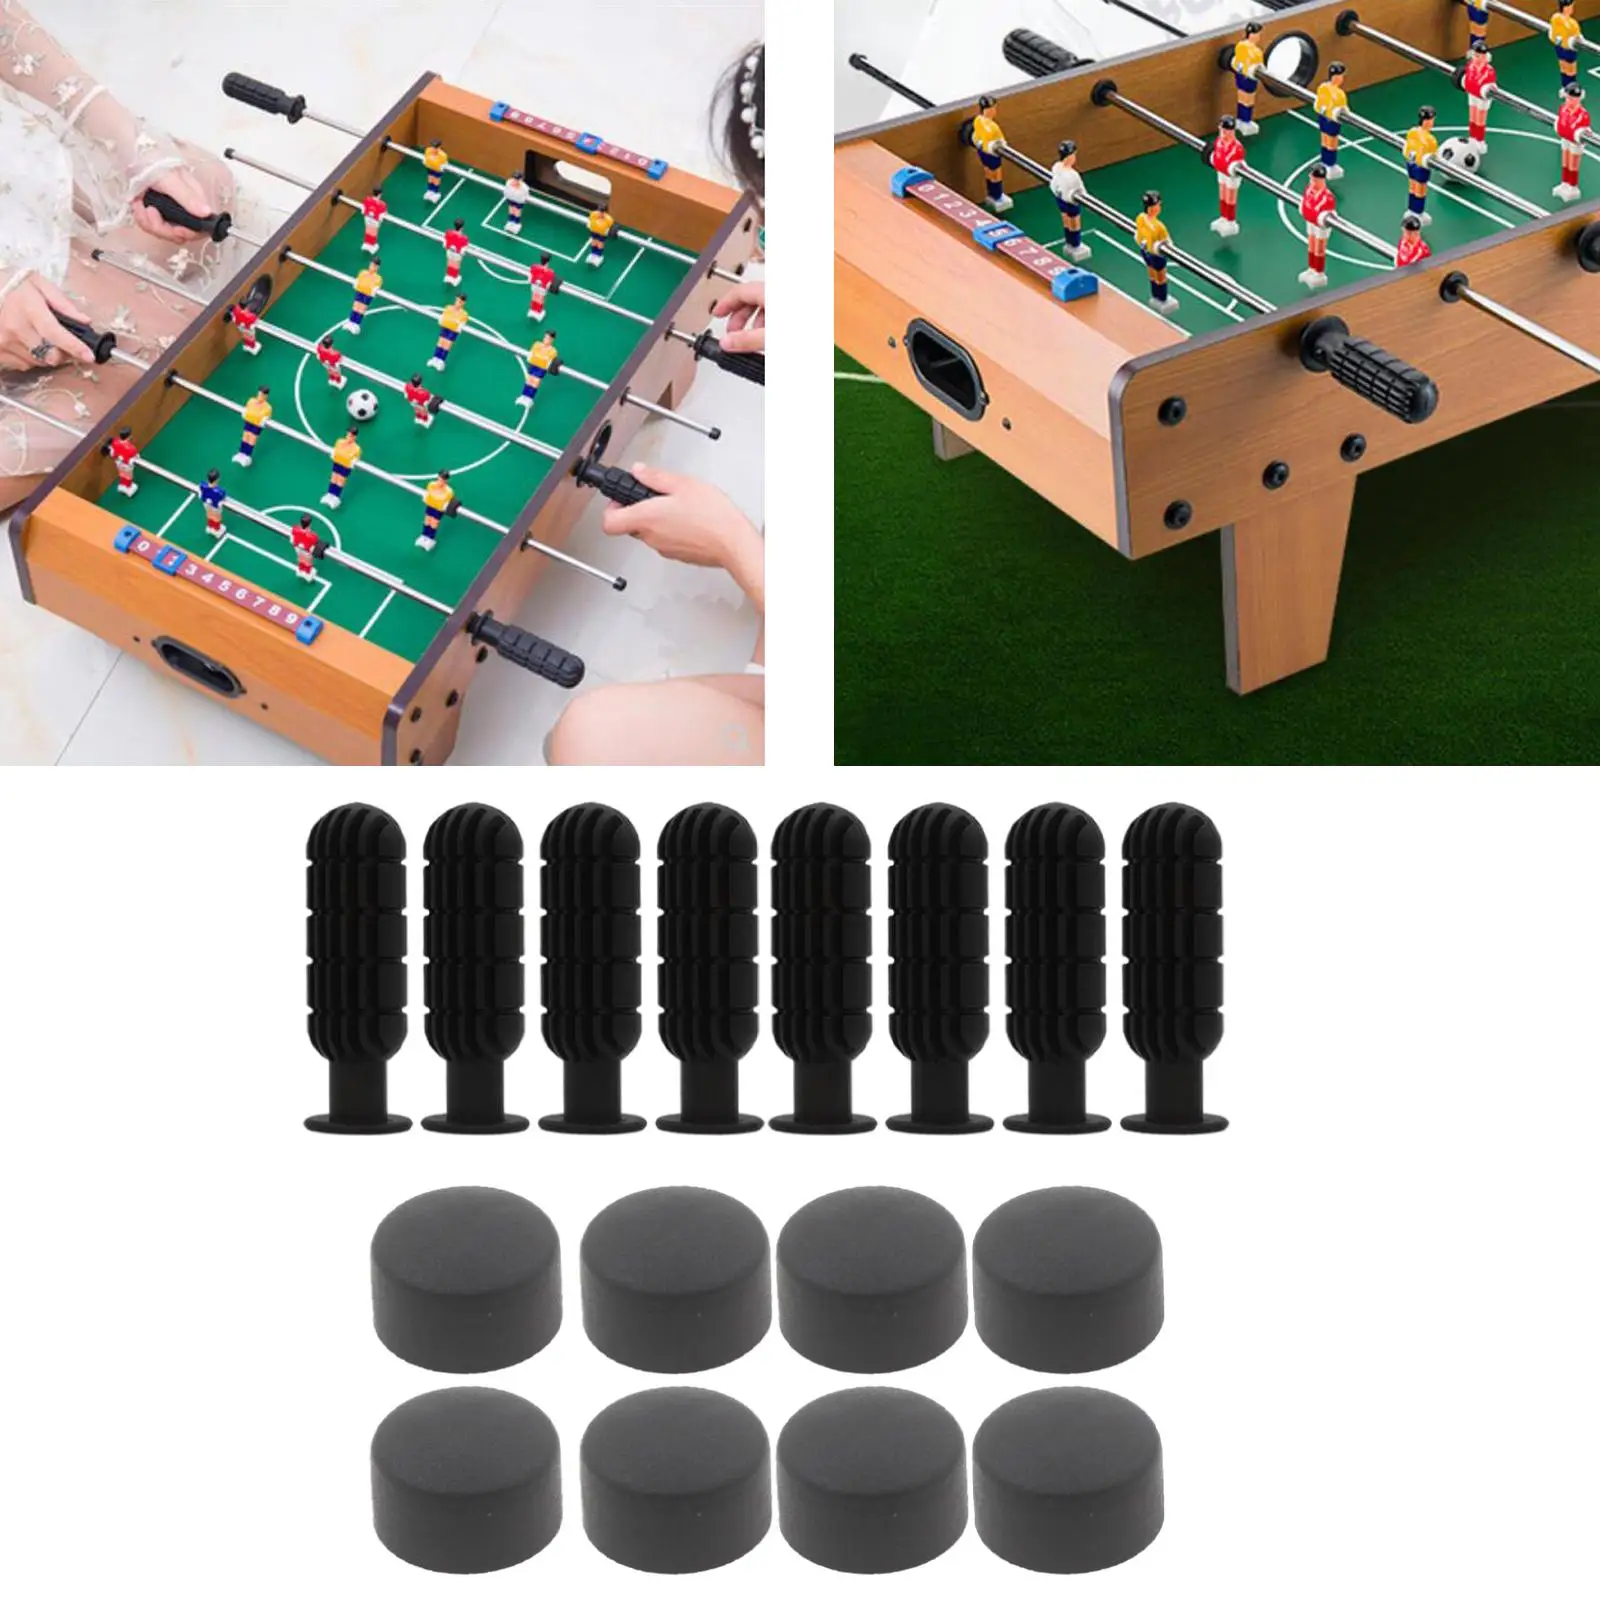 8 Pairs Foosball Handle Replace Table Football Game Black Non-Slip Design Handle Grips & End Plugs Accessories Components